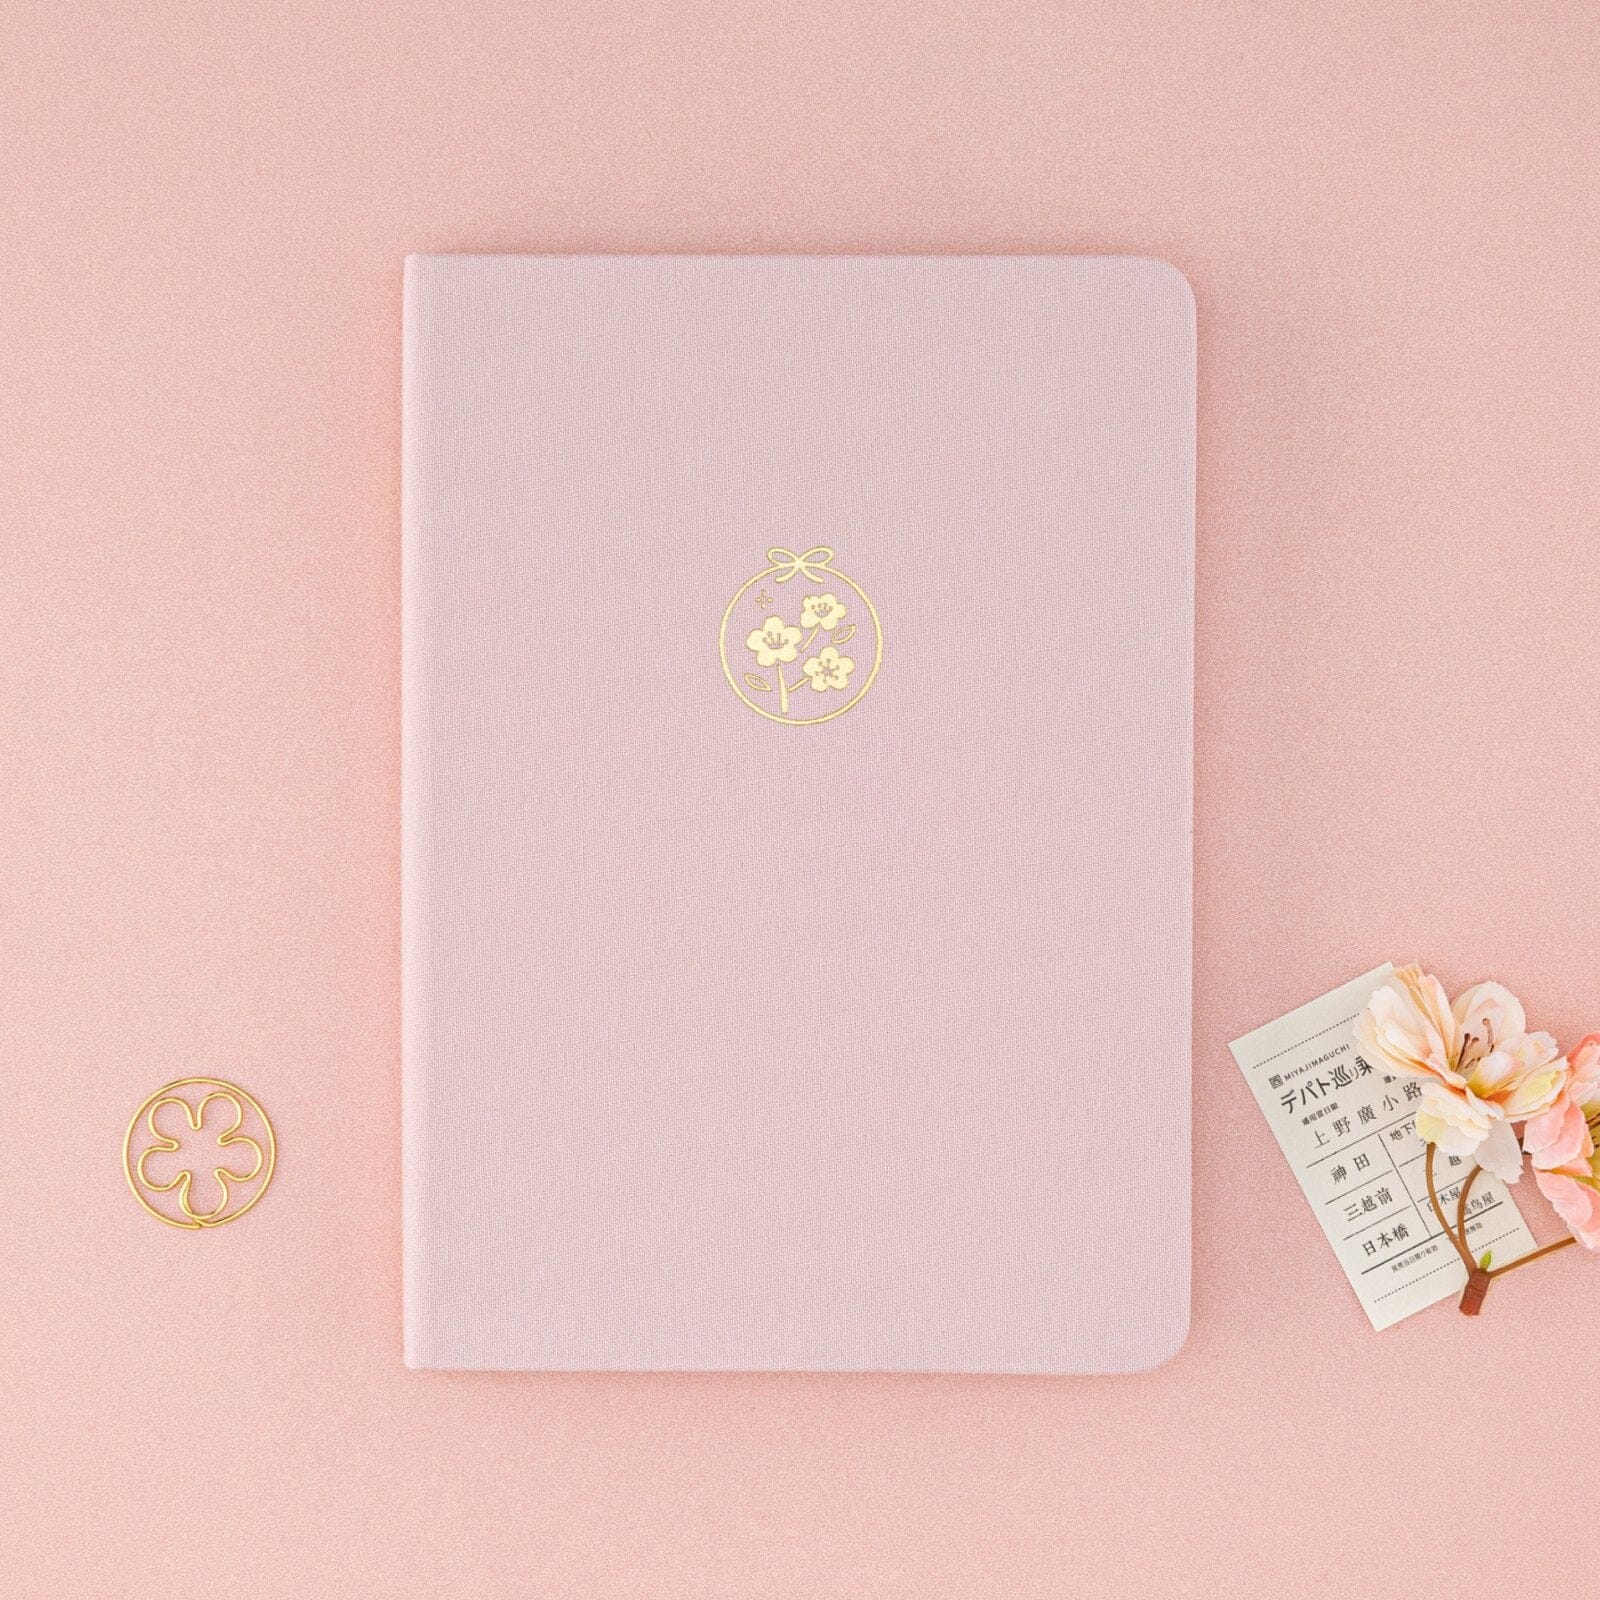 Tsuki Sakura Breeze limited edition bullet journal by Notebook Therapy